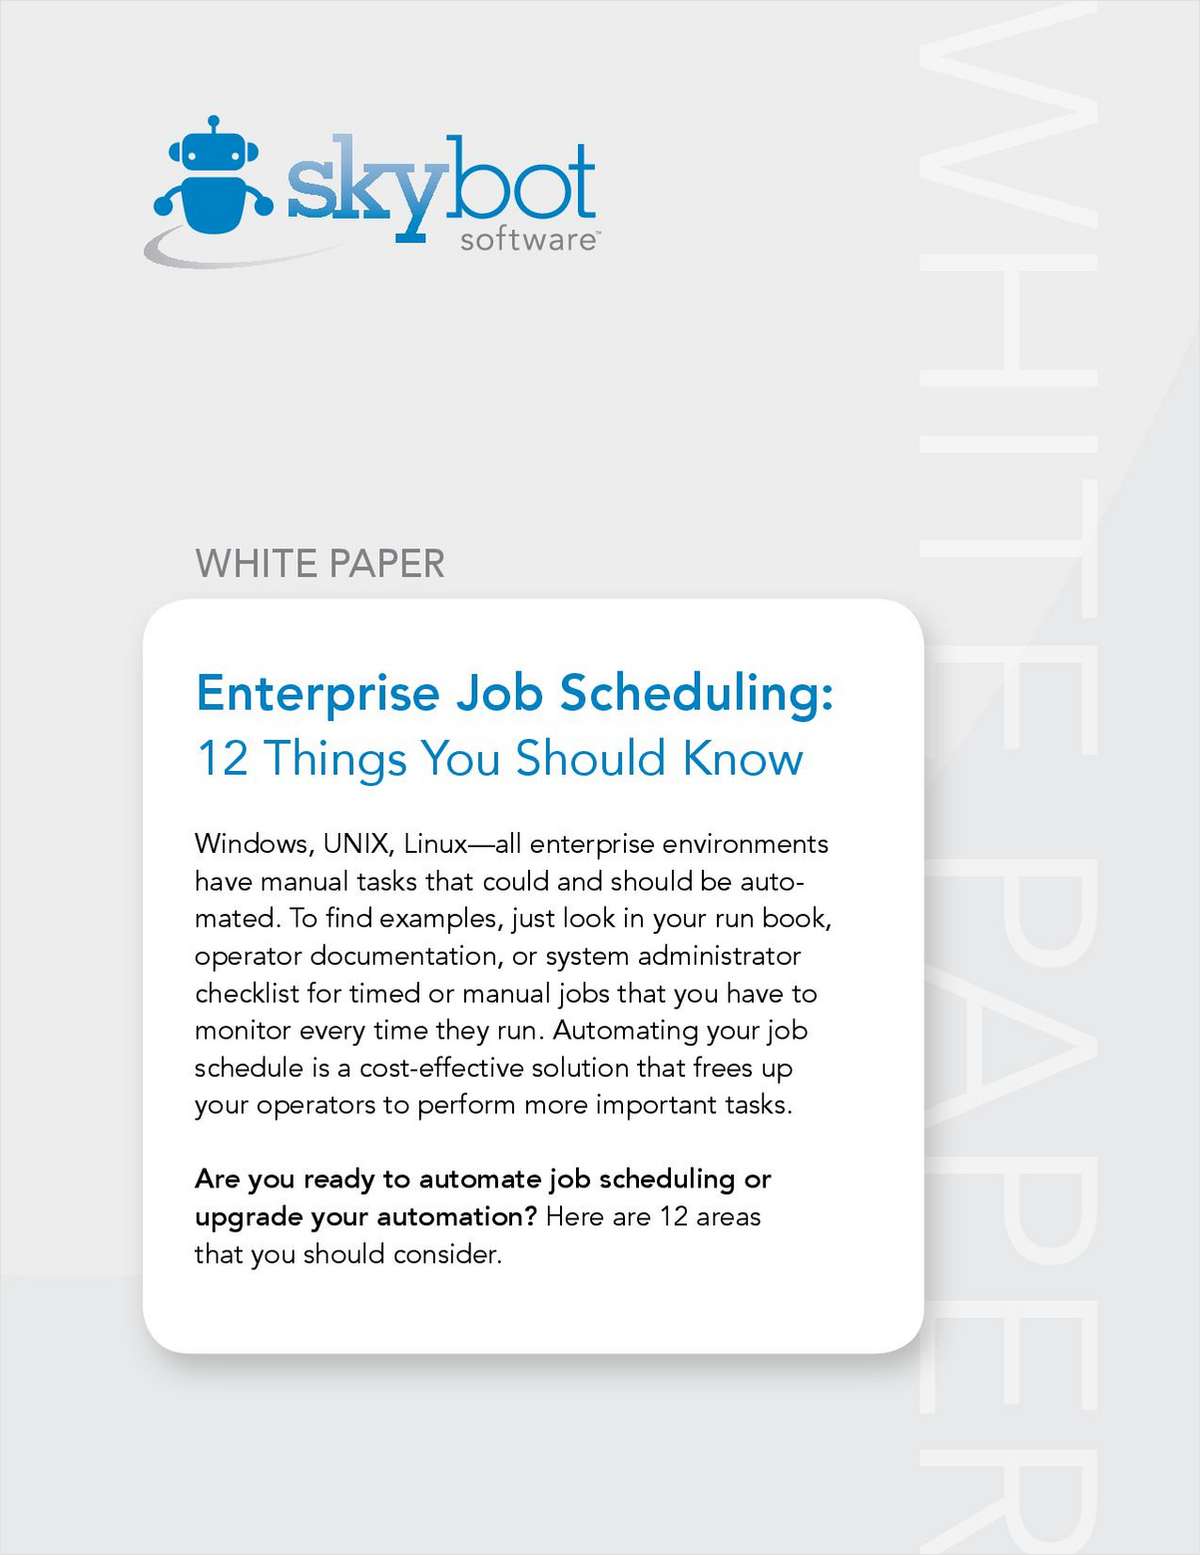 Enterprise Job Scheduling: 12 Things You Should Know